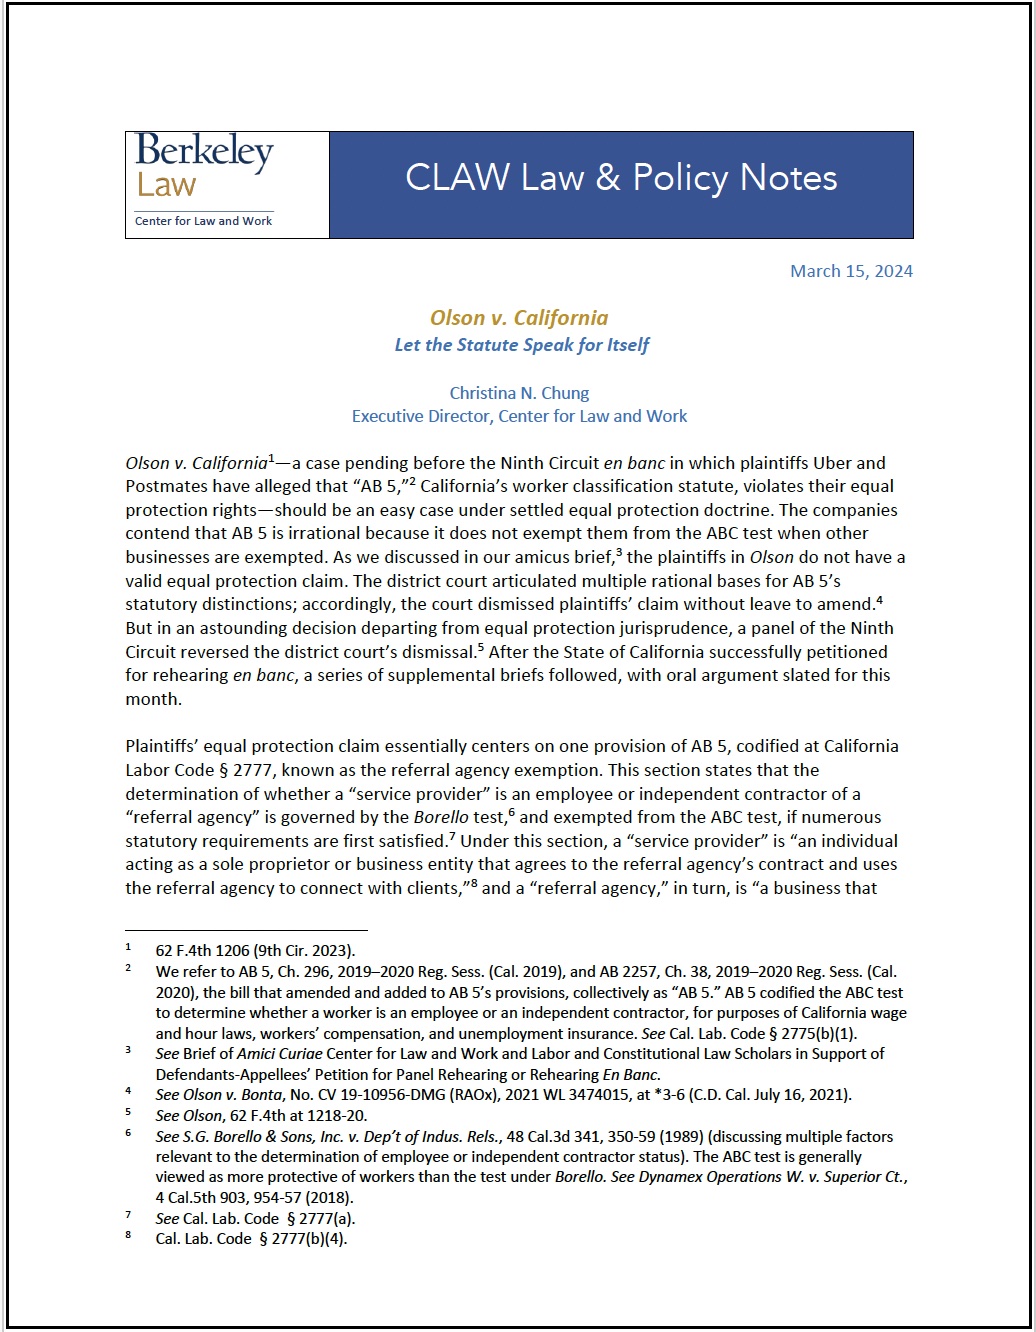 Olson v. California CLAW Note Cover page